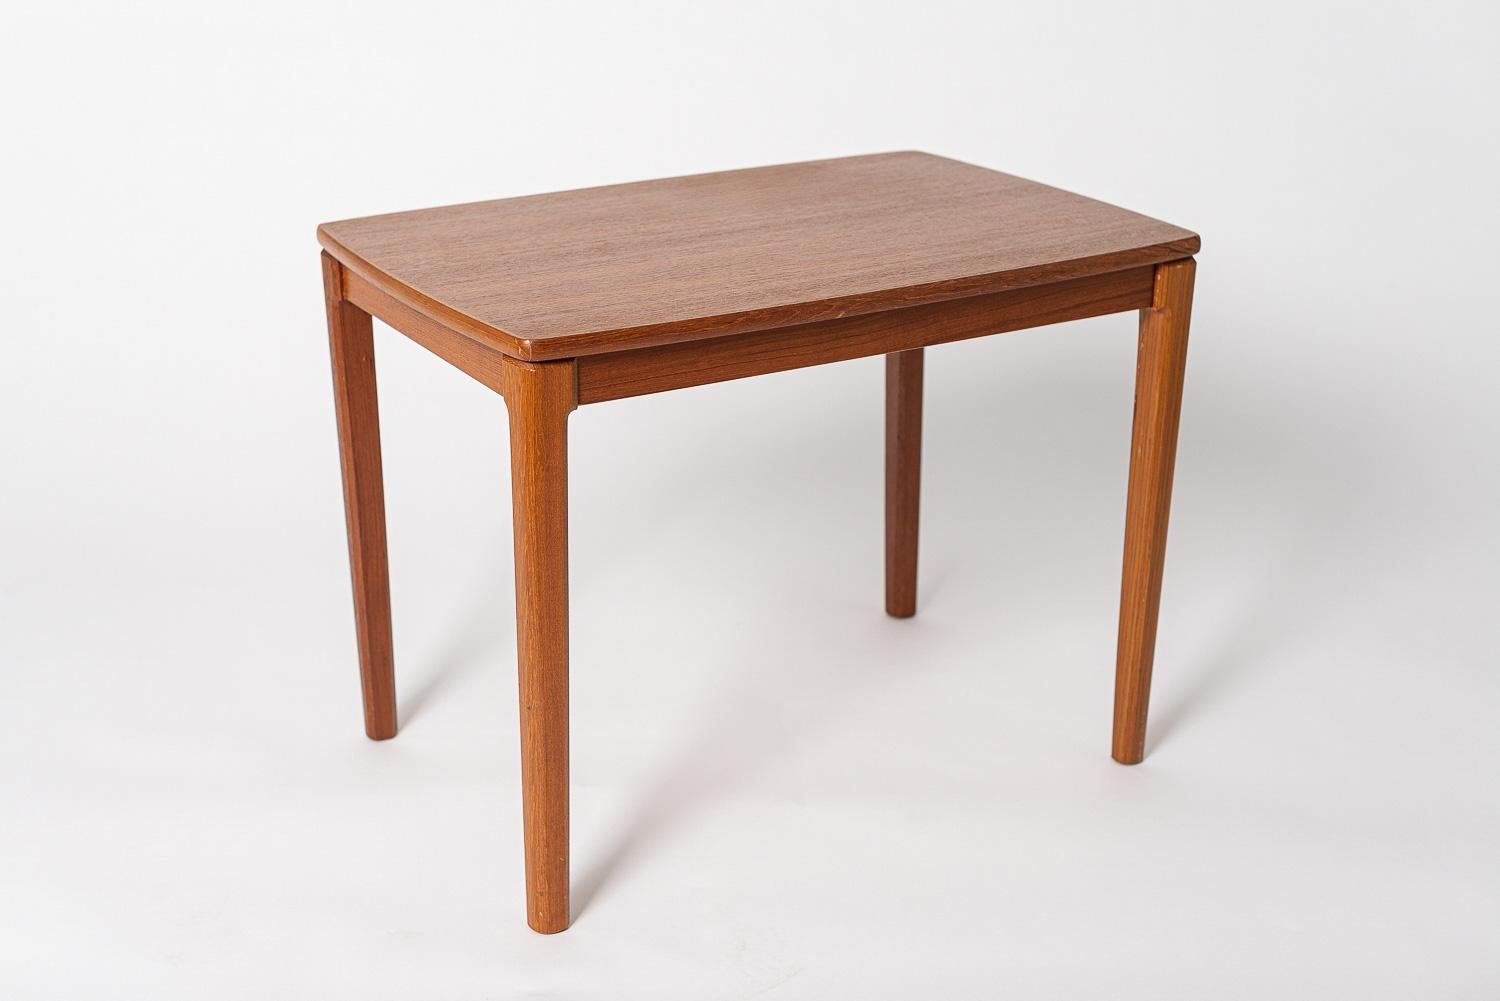 This vintage Midcentury Swedish modern teak wood side table was designed by Albert Larsson for Alberts Tibro and made in Sweden in 1968. The end table is sturdy and well-crafted from solid teak and features Classic Minimalist Scandinavian design